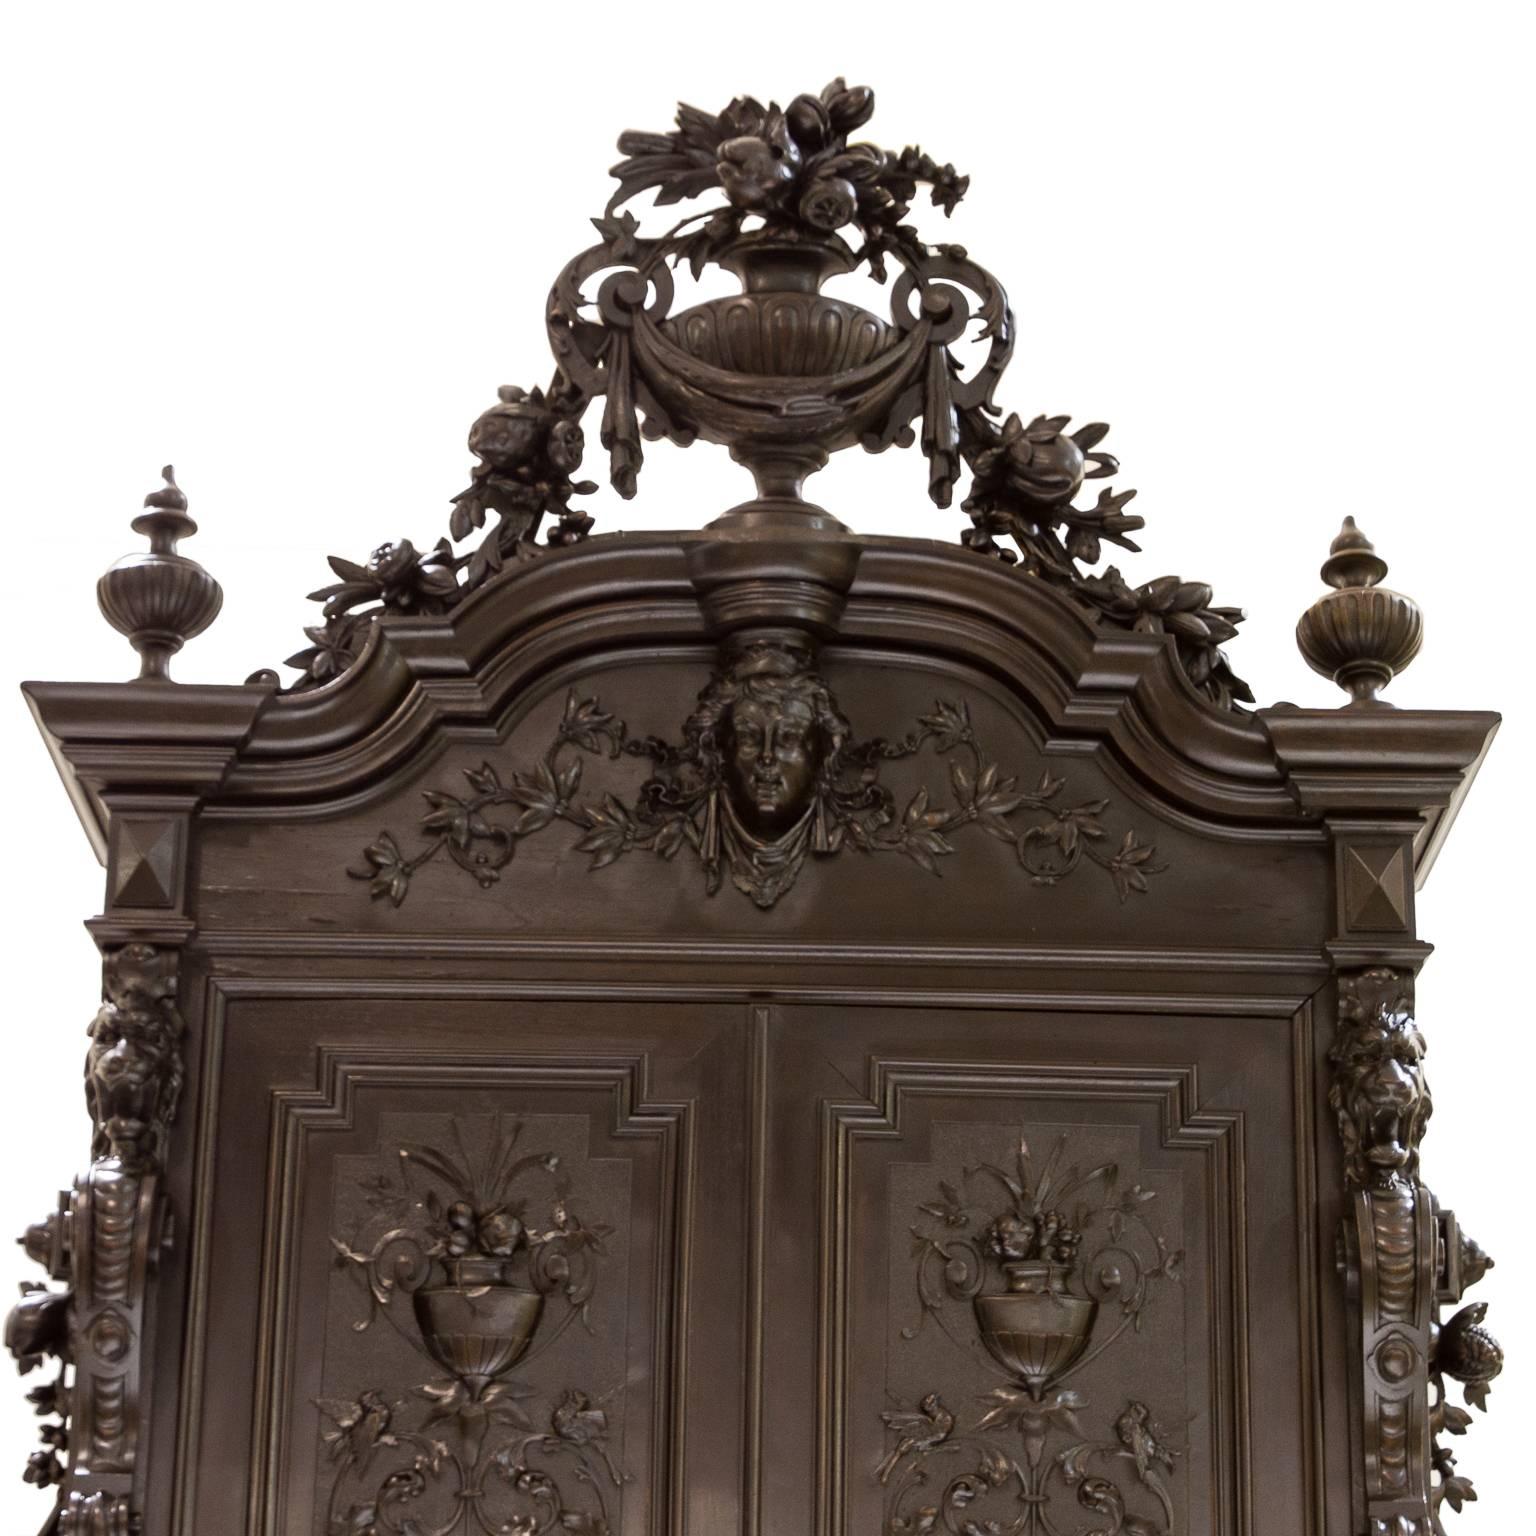 An astounding French Renaissance walnut cabinet with superb detailed carvings. This piece is not only striking but its large. The top has a very elaborate carved pediment (removable for transport) and flanked by two large finials. The panel below is